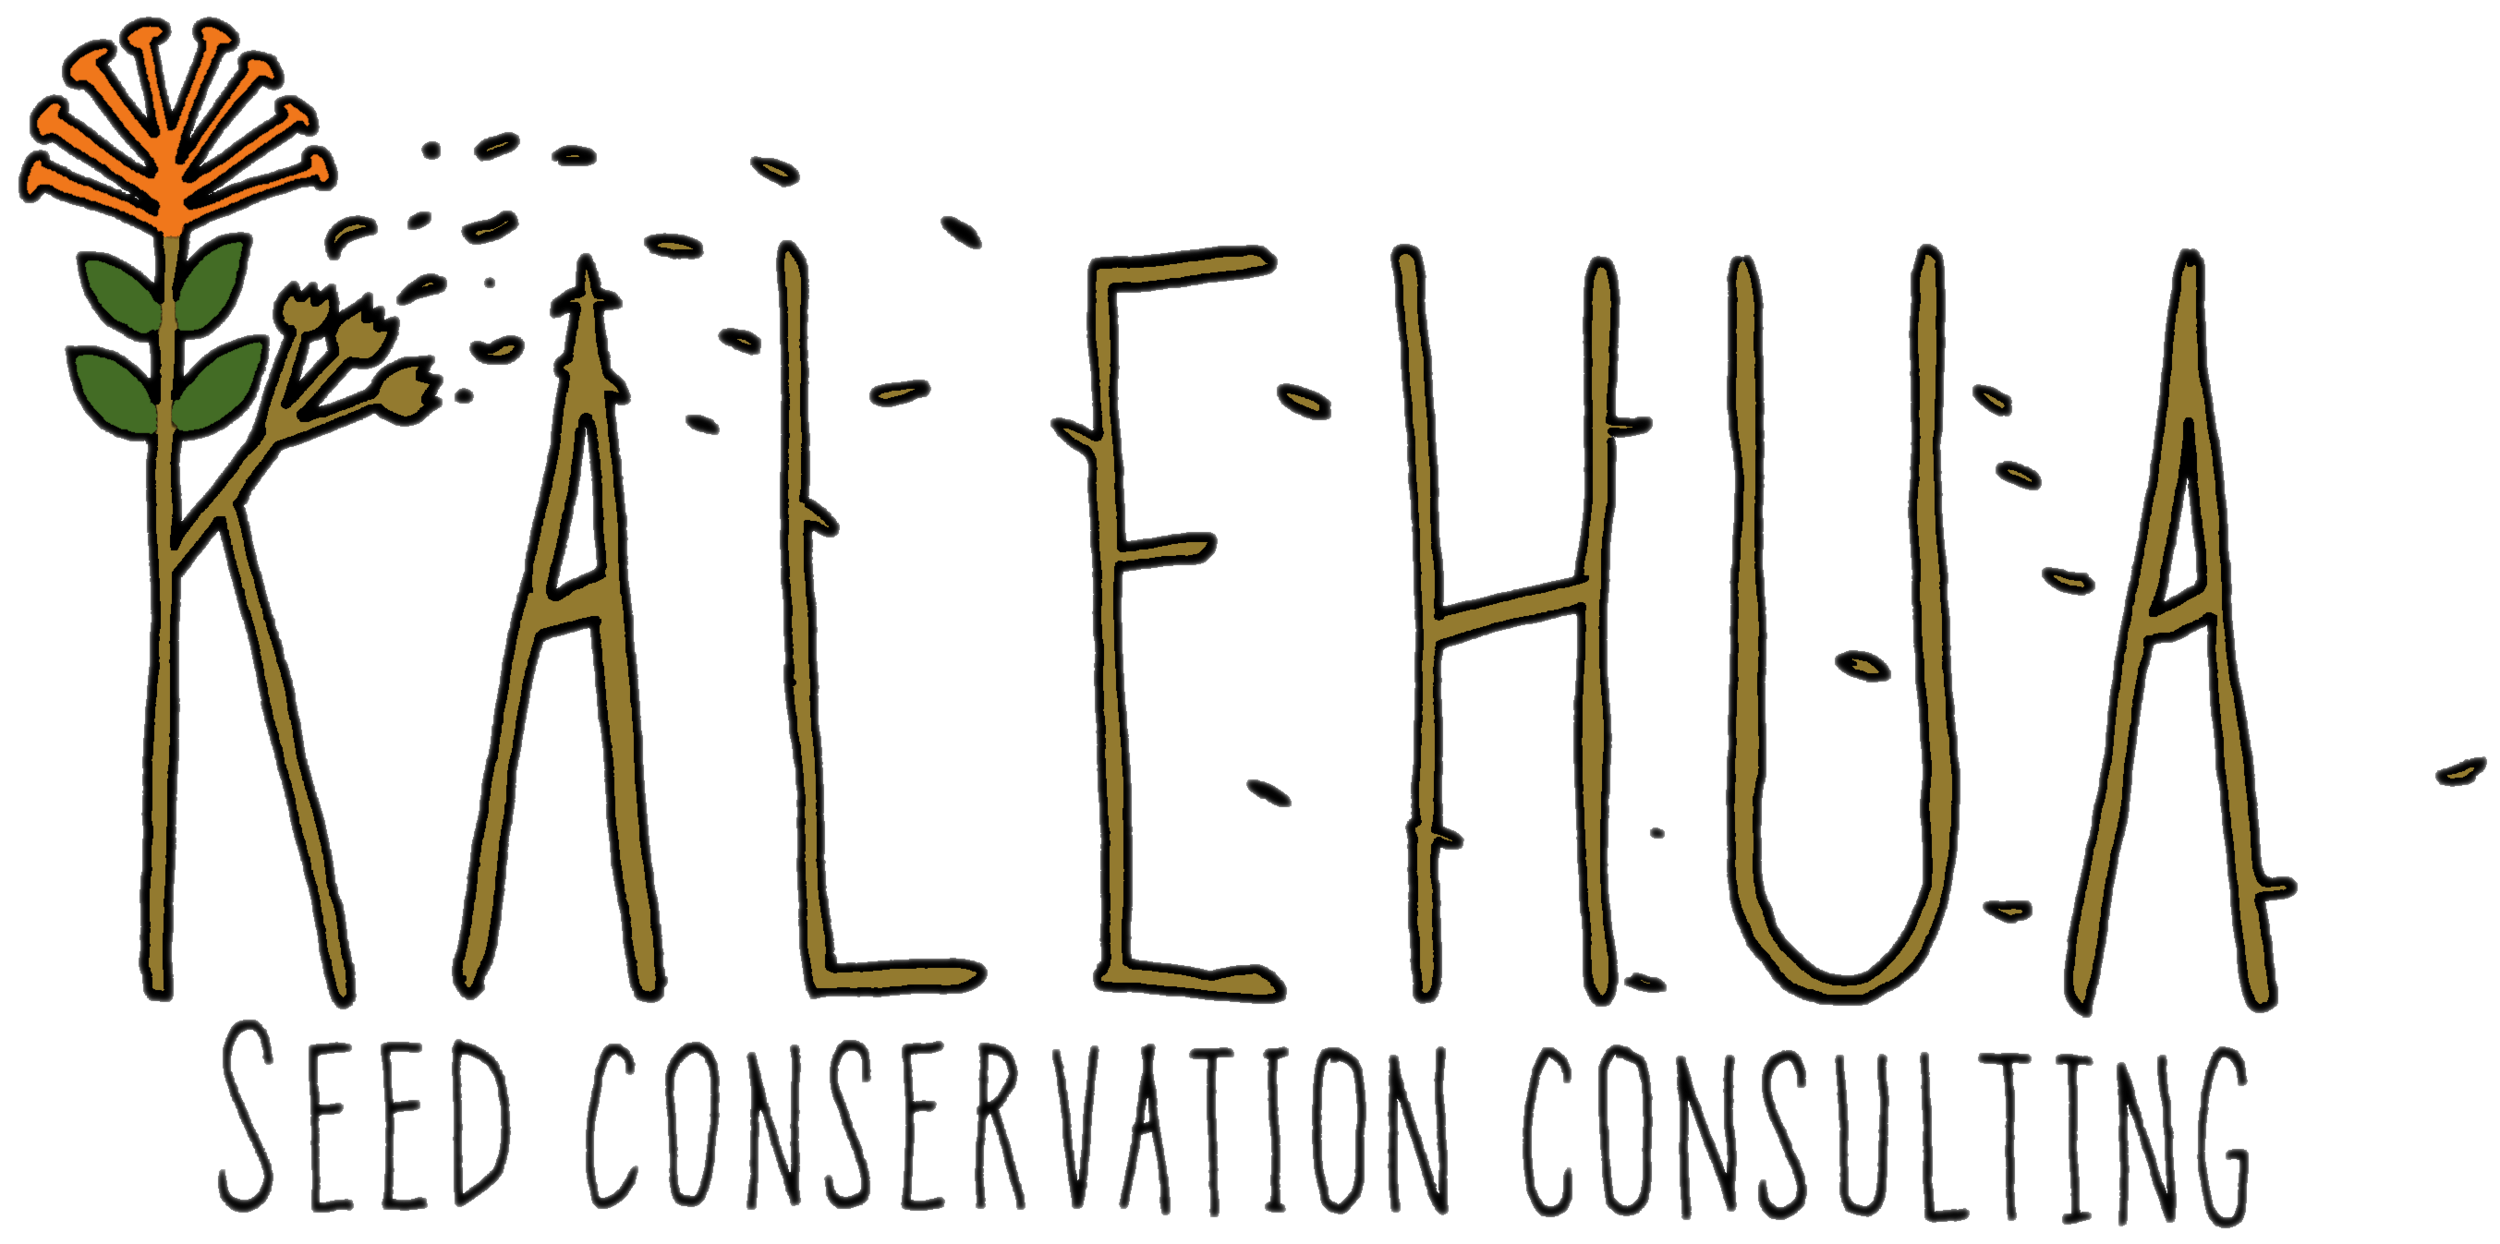 Kalehua Seed Conservation Consulting